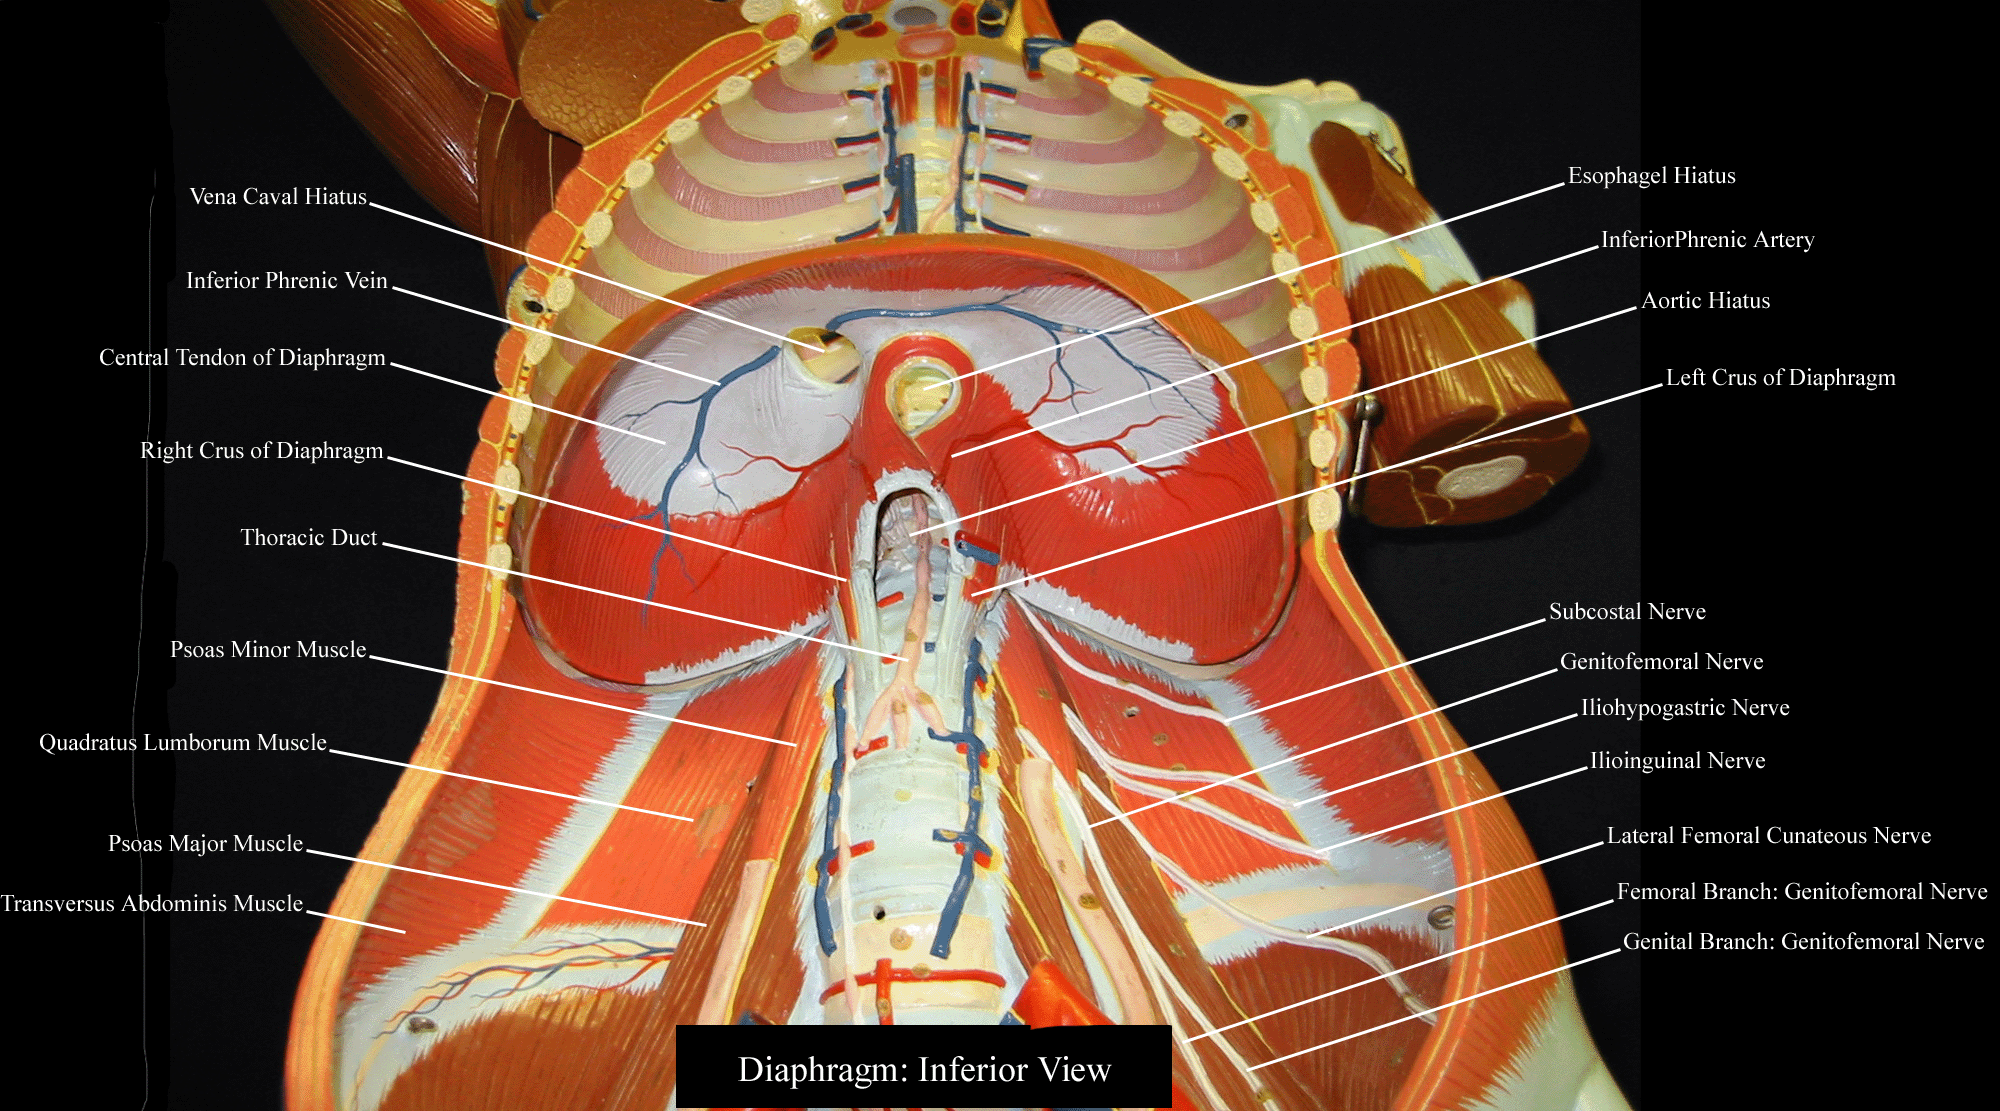 a labeled picture of the diaphragm from a torso model from an inferior view